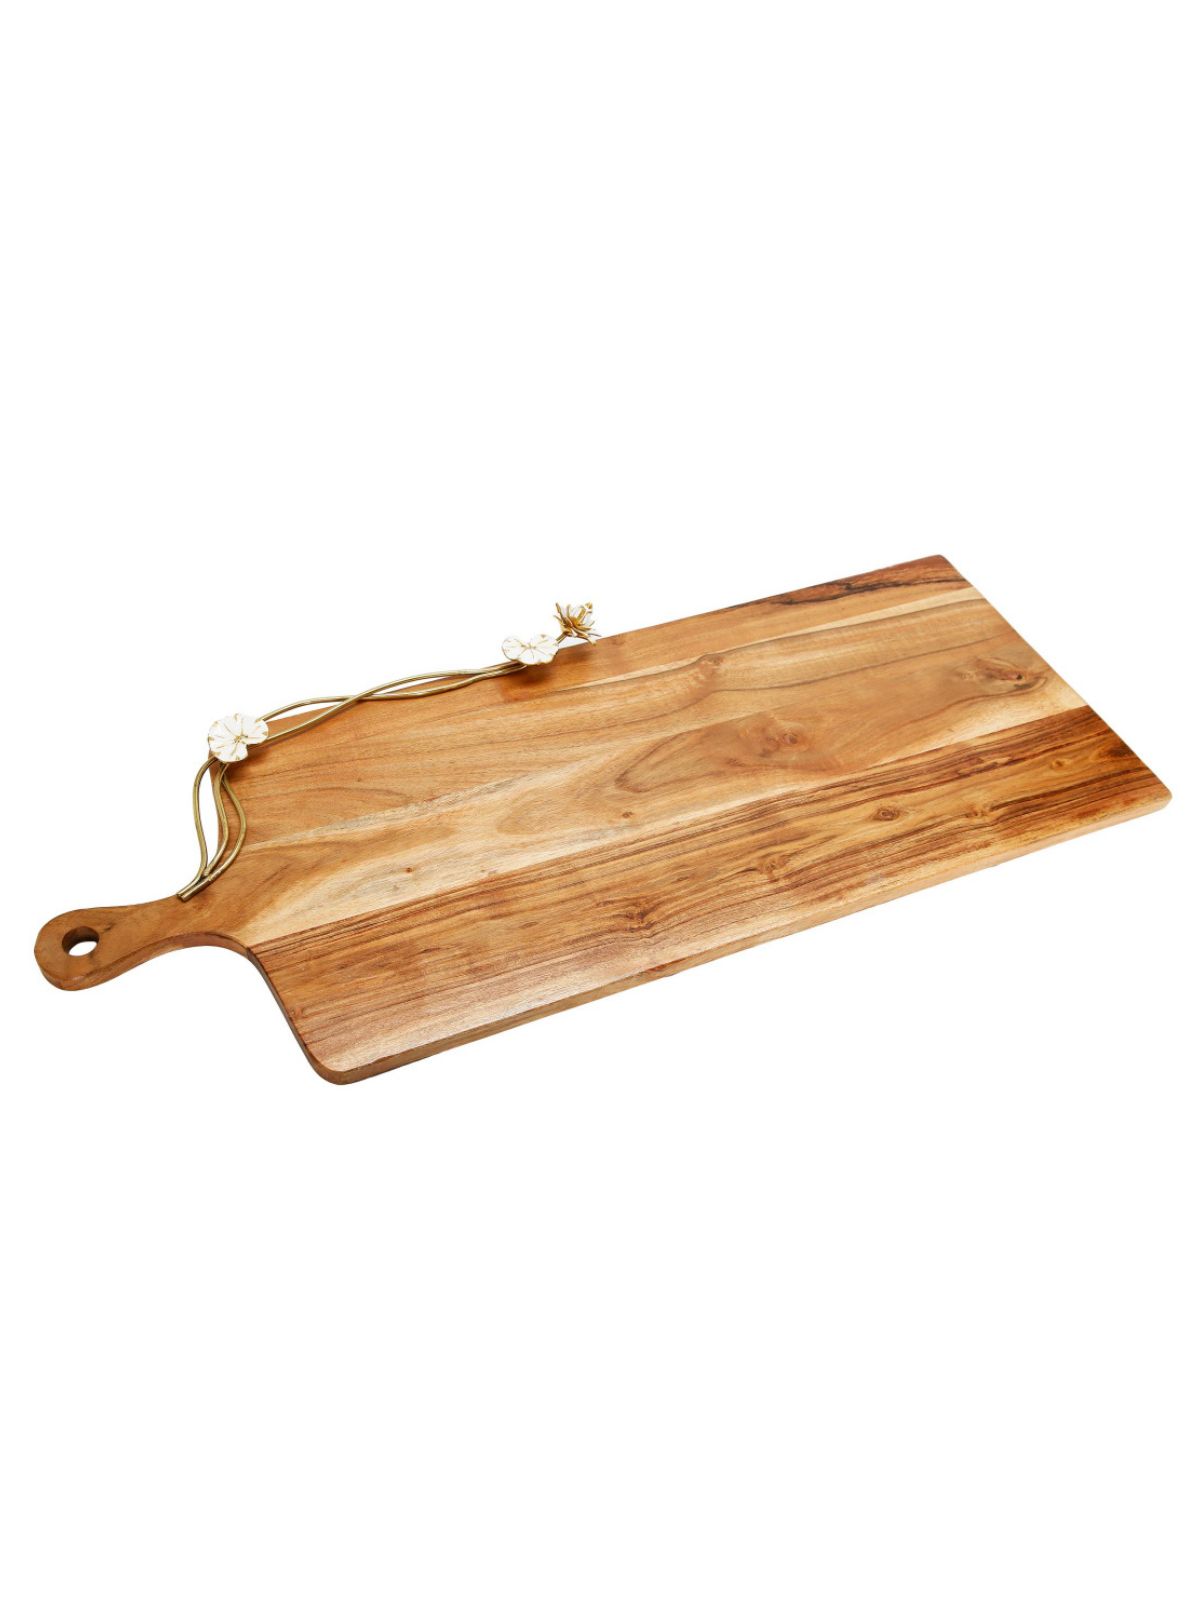 This 28L wooden serving board with white lotus design, Sold by KYA Home Decor